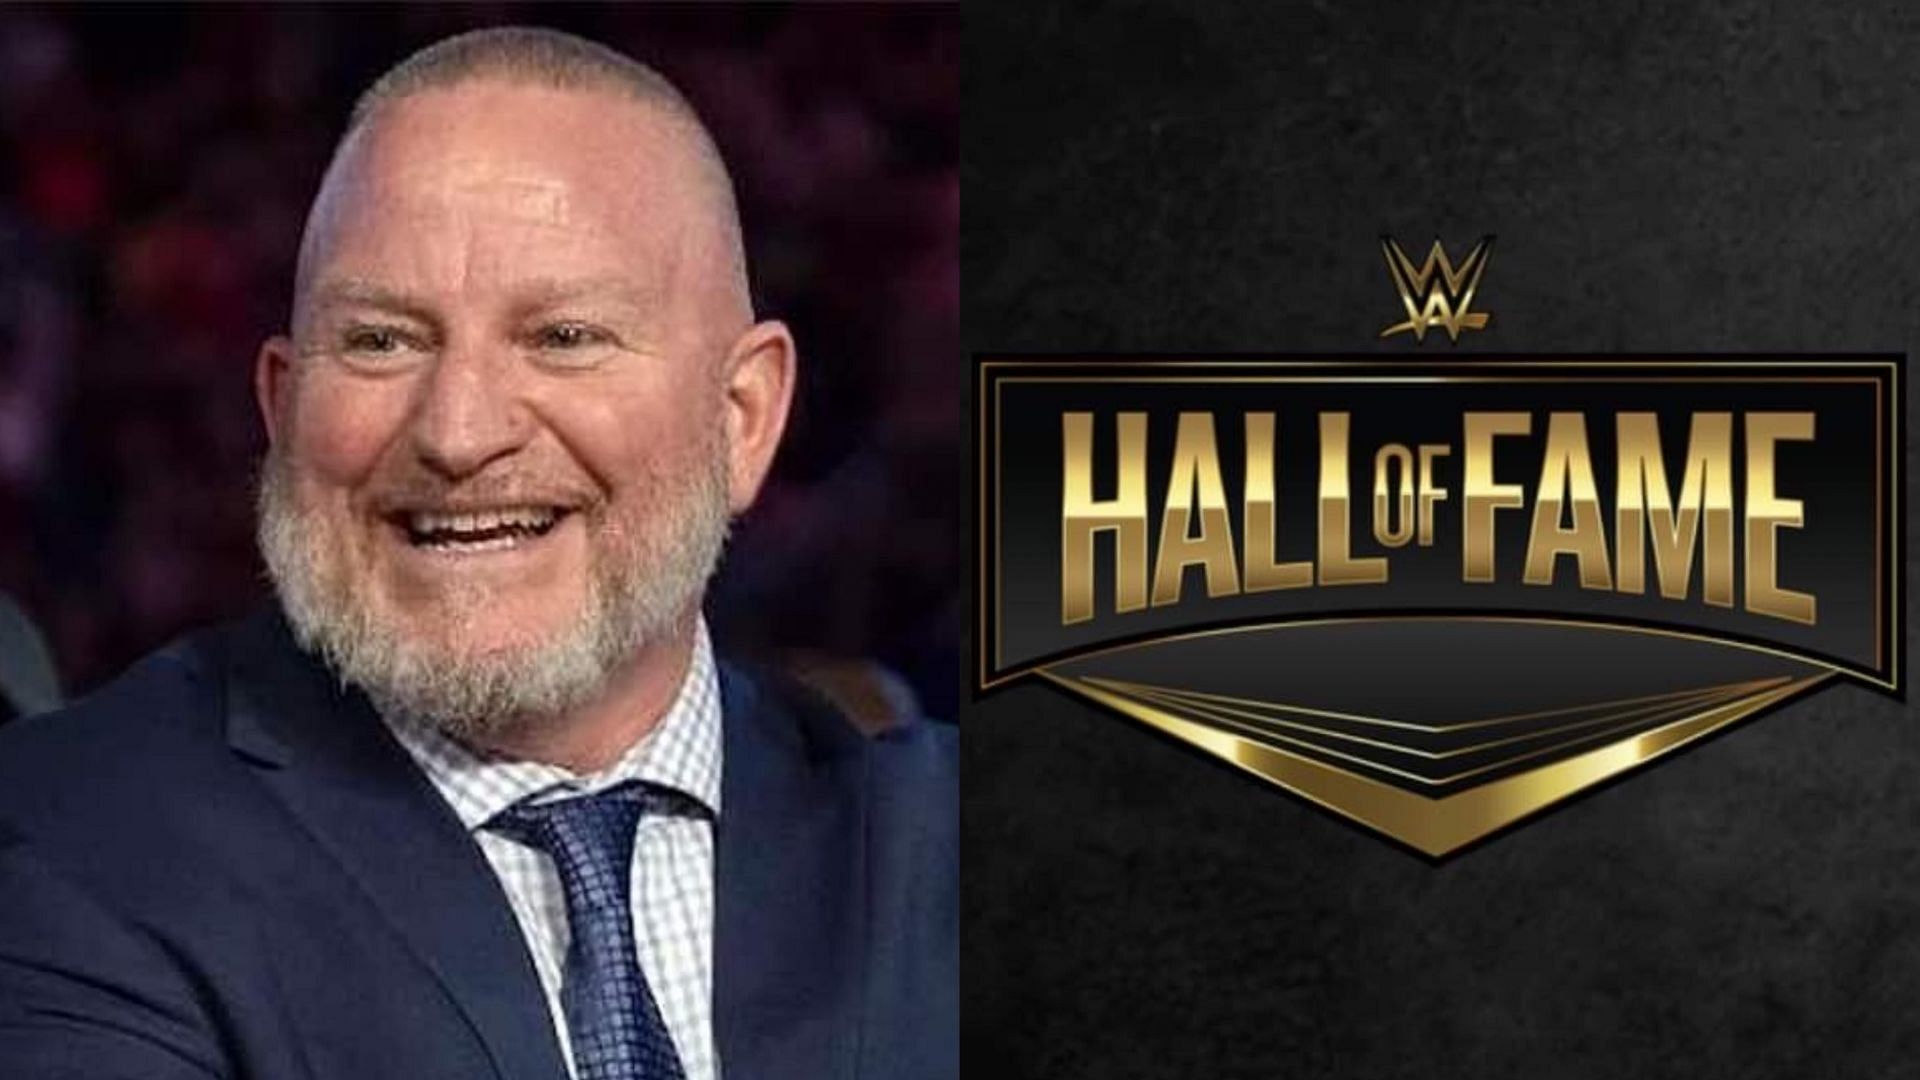 Road Dogg is a WWE Hall of Famer.